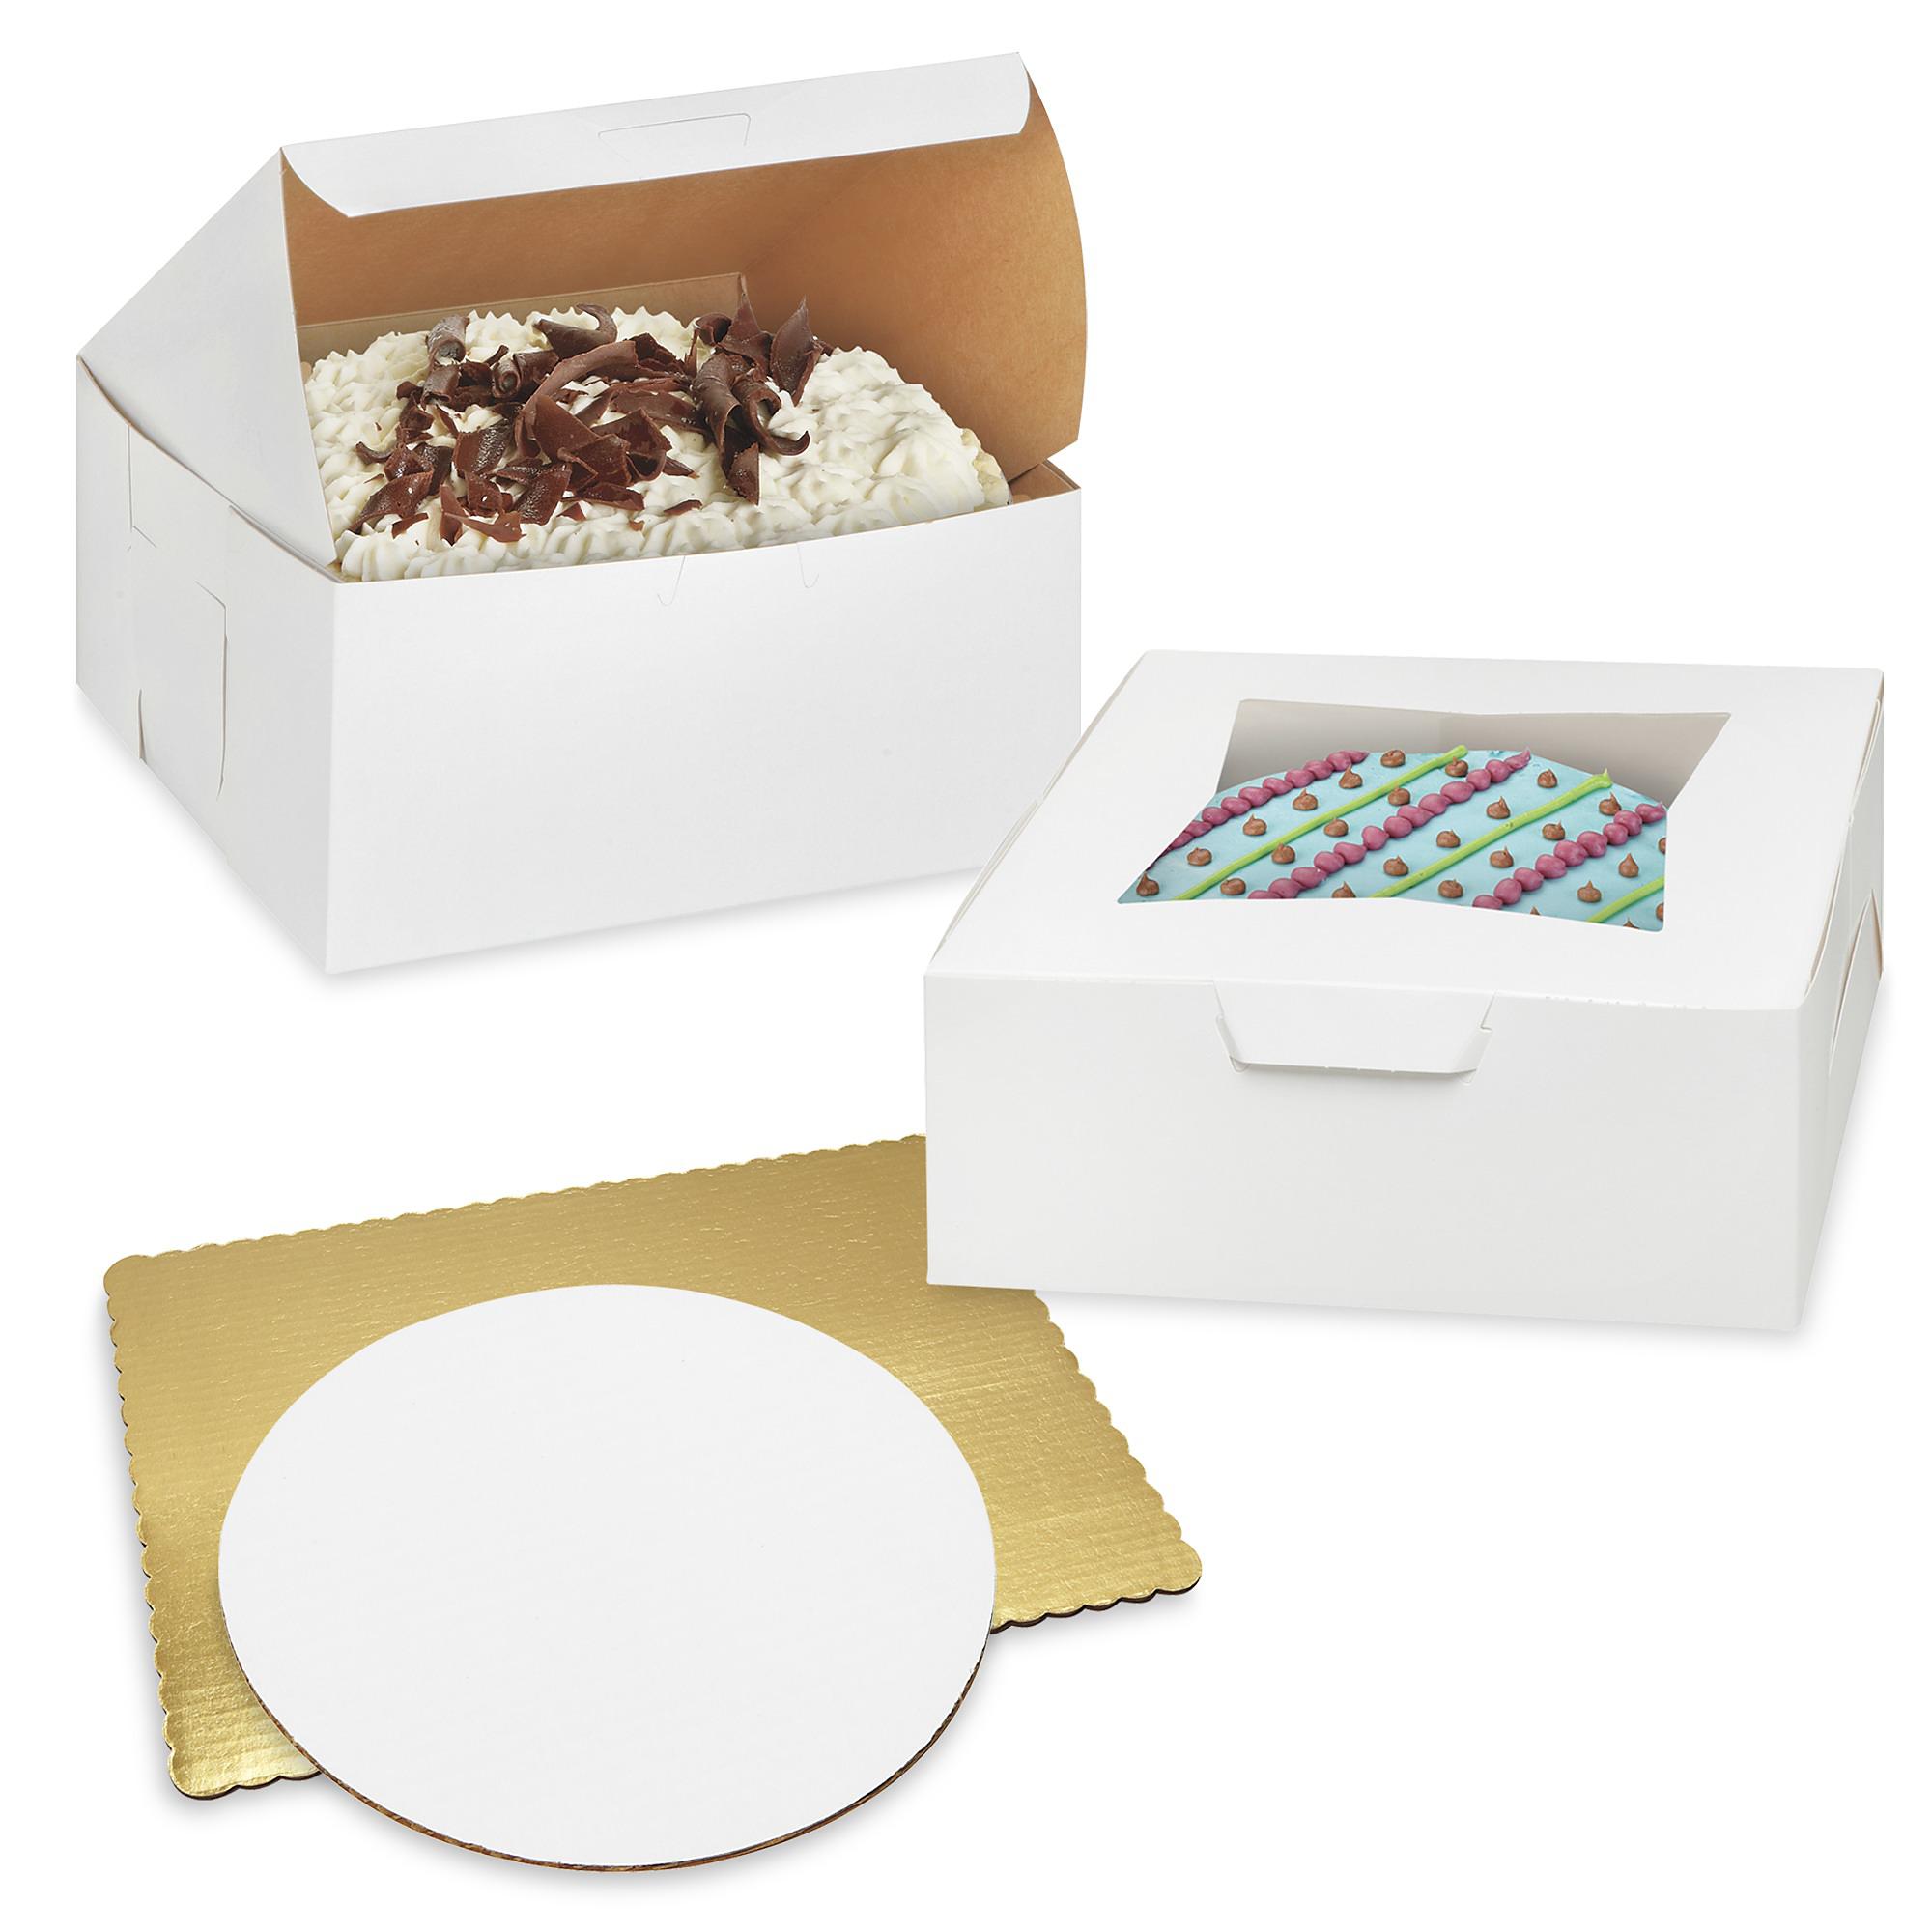 for 6" cakes Bakery Cake Boxes 4-Set with Grease Proof Square Cake Boards 